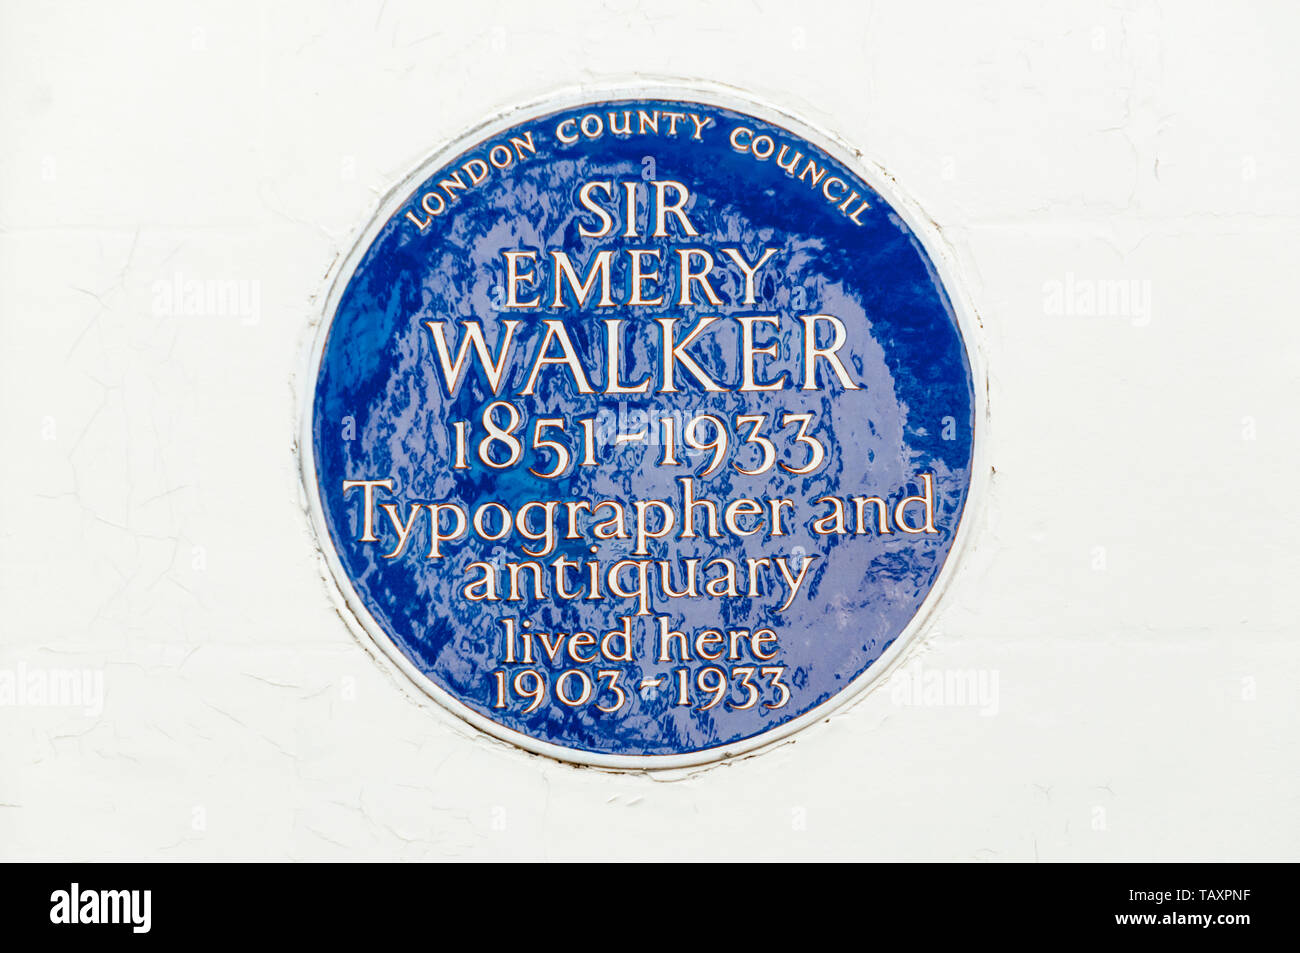 A blue plaque commemorating the typographer and antiquary, Sir Emery Walker in Hammersmith, London. Stock Photo